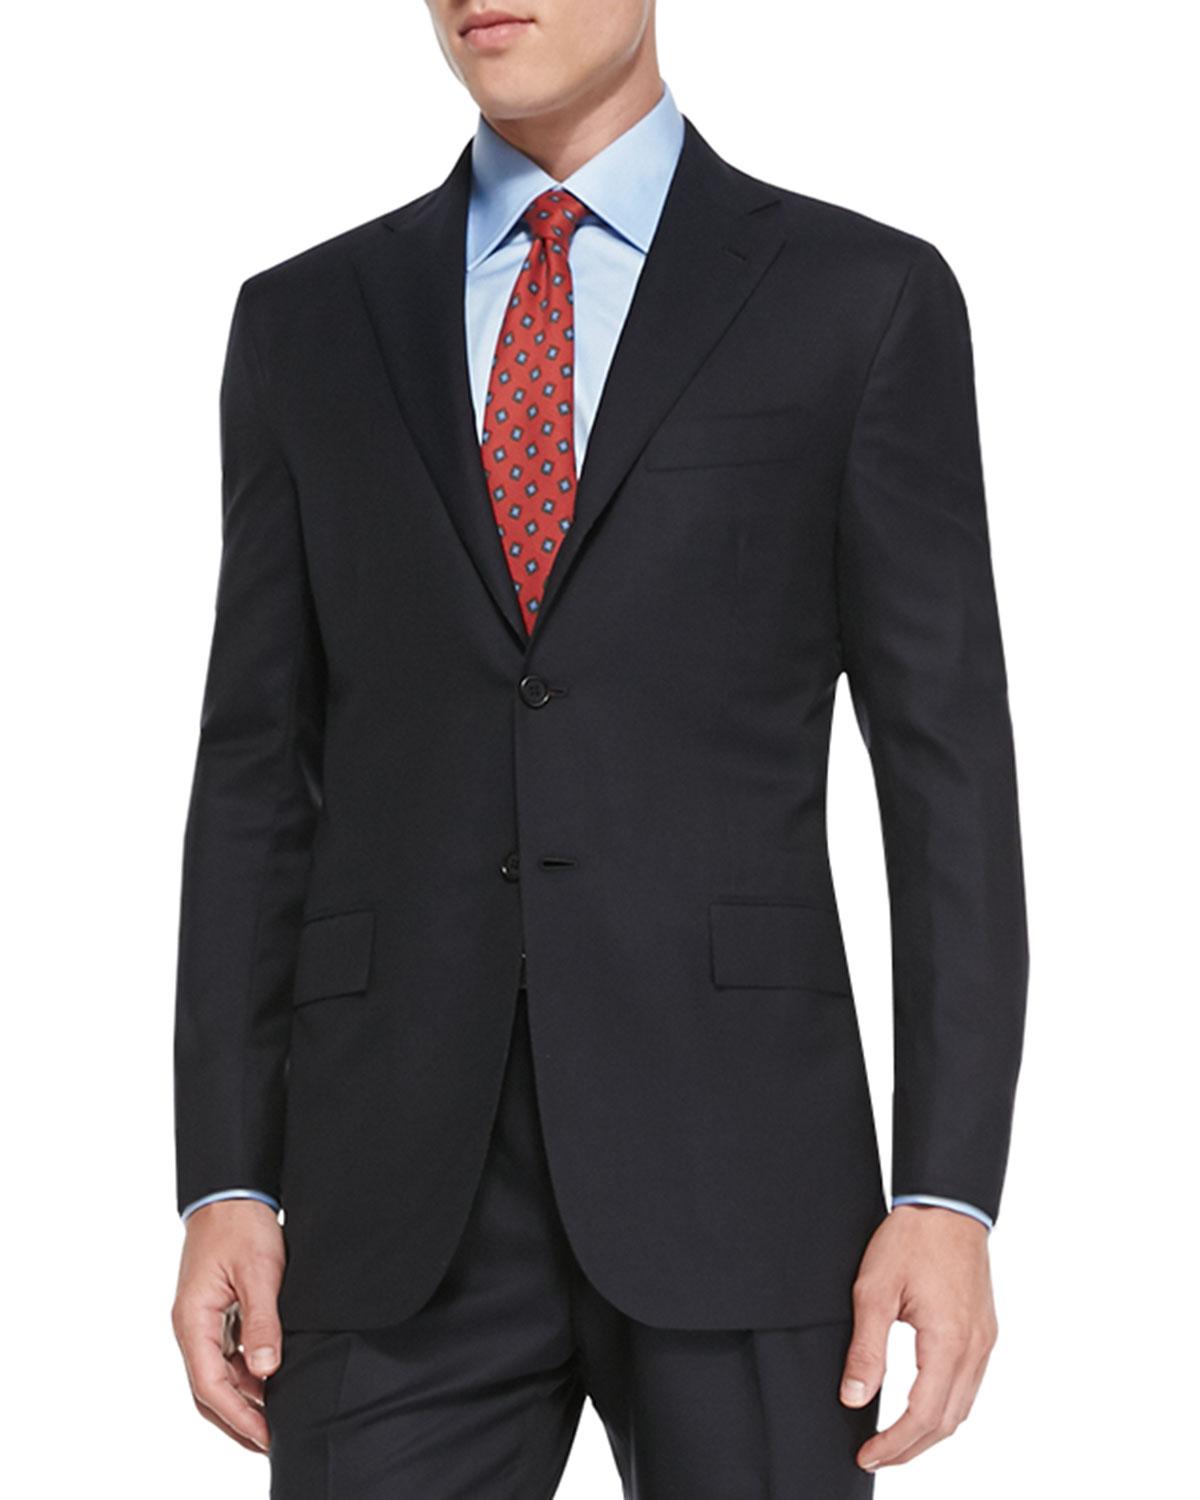 Lyst - Kiton Navy Suit in Black for Men